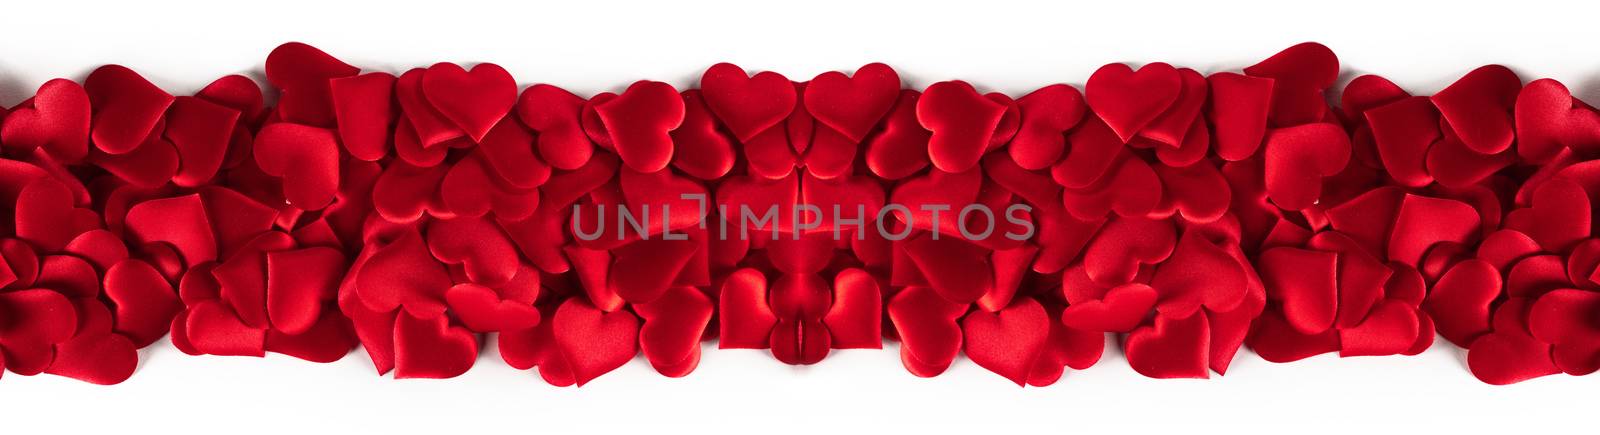 Valentine's day many red silk hearts stripe isolated on white background, love concept